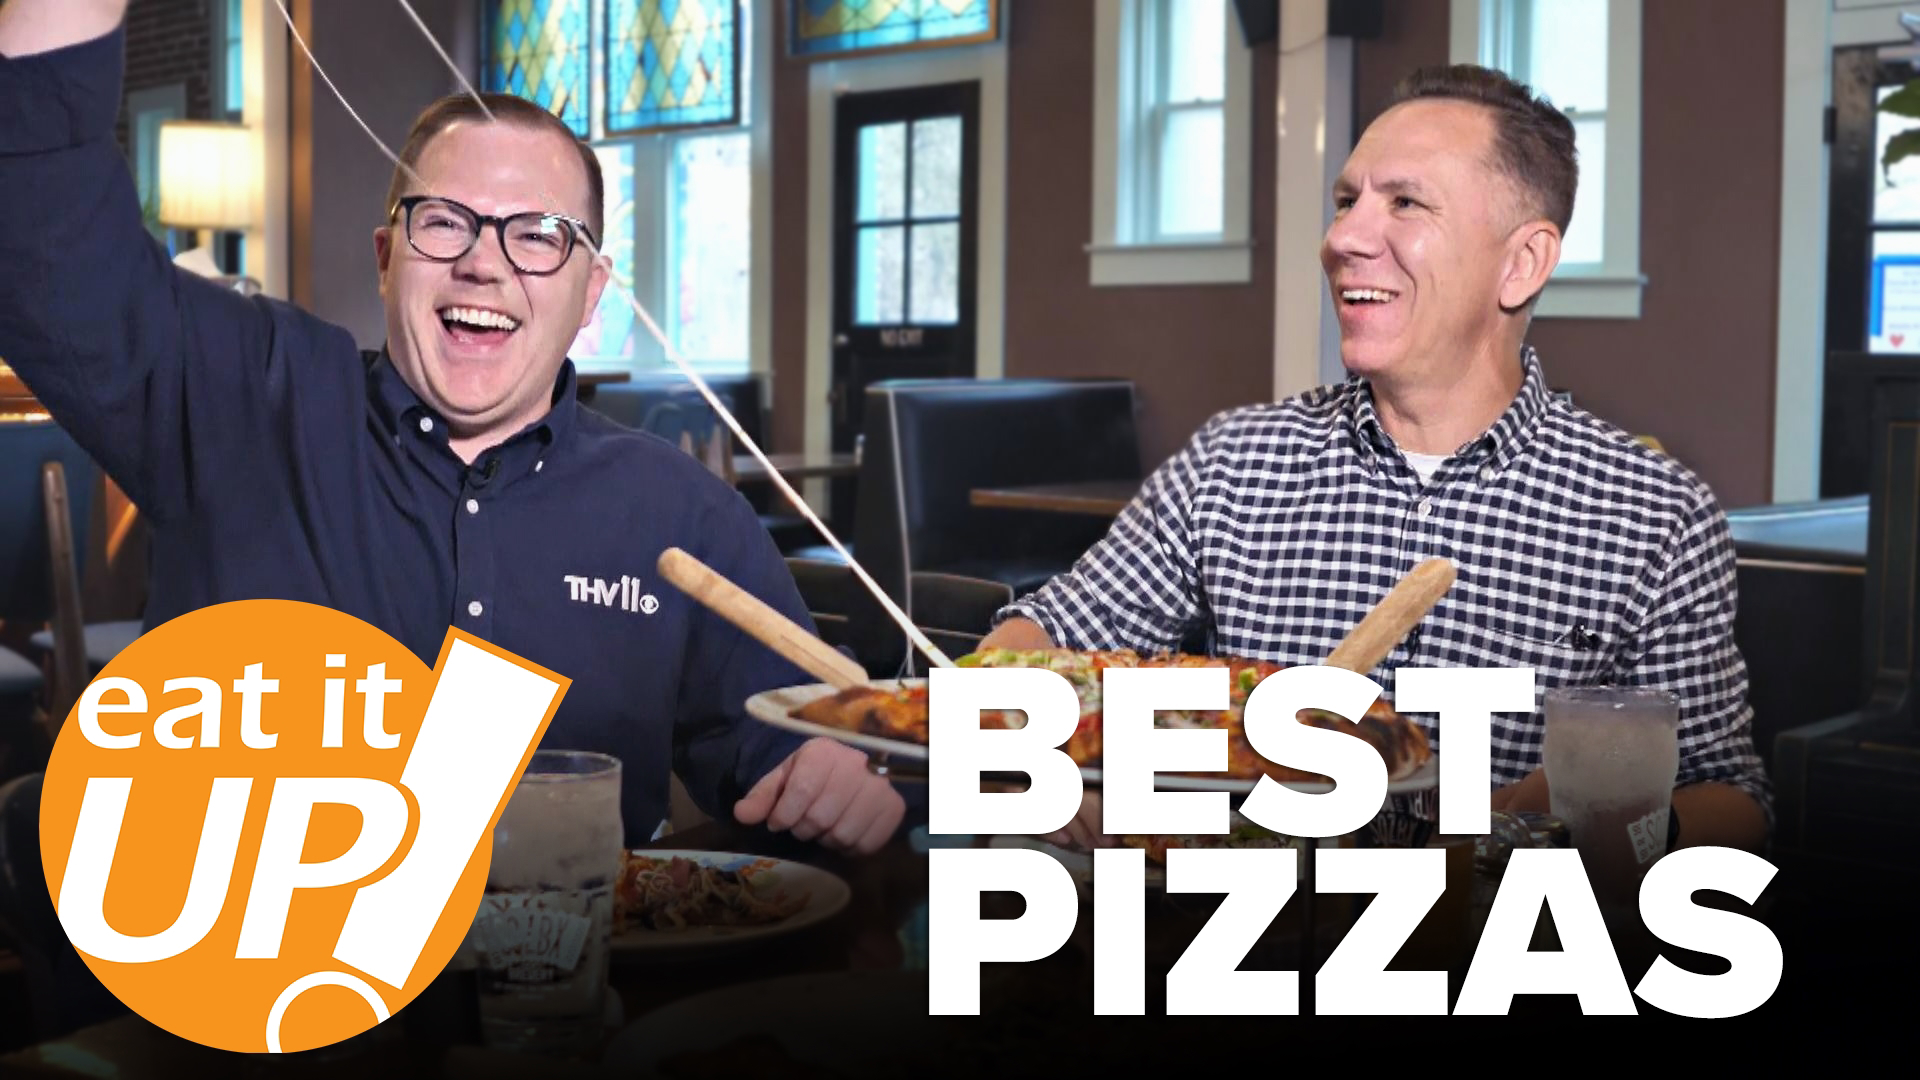 Join Skot Covert and friends as they travel around looking for the best pizza in Central Arkansas!